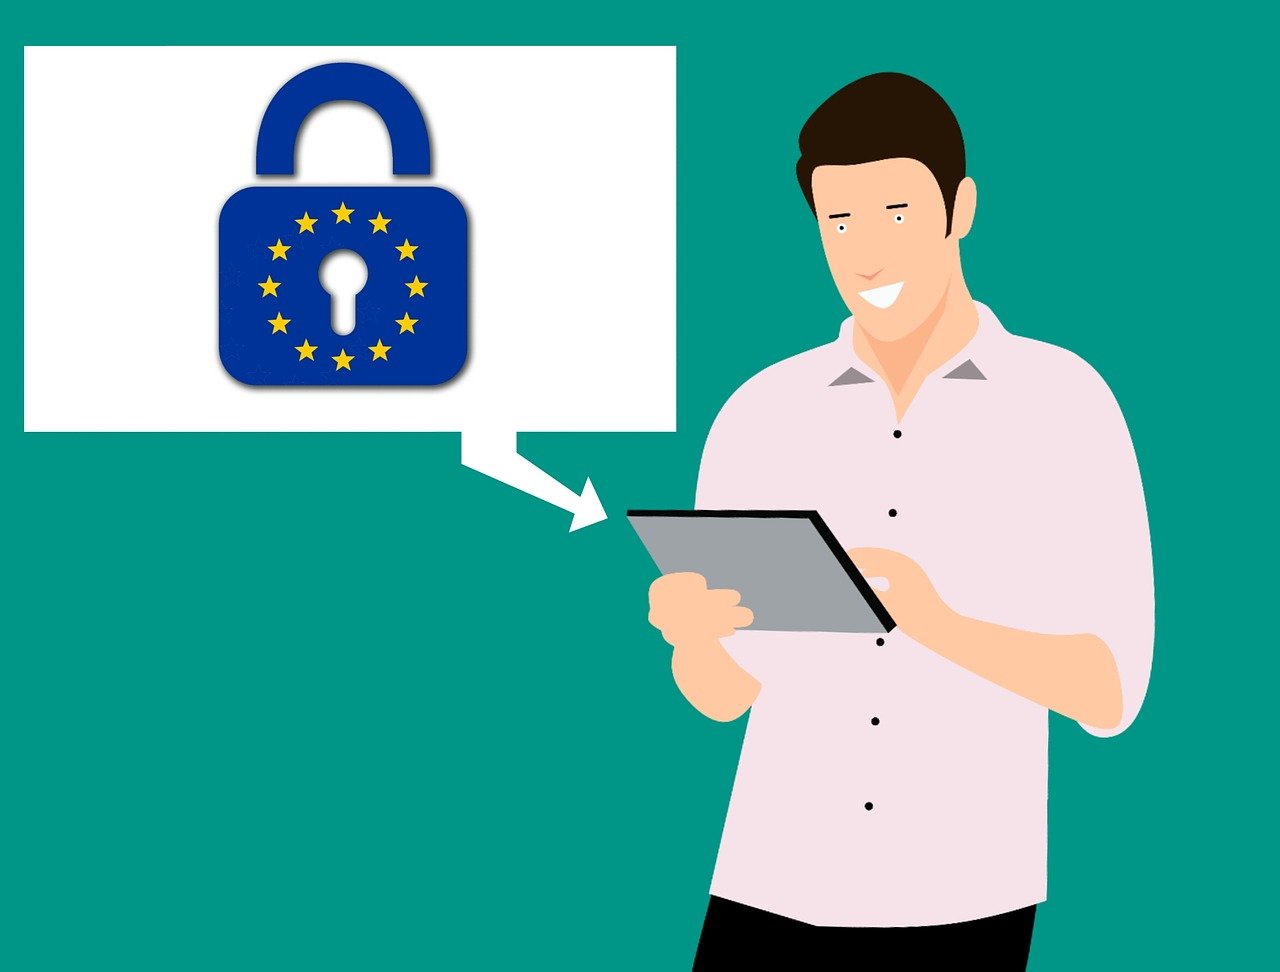 a man holding a tablet next to a padlock, an illustration of, european, easy to use, poser, open eye freedom